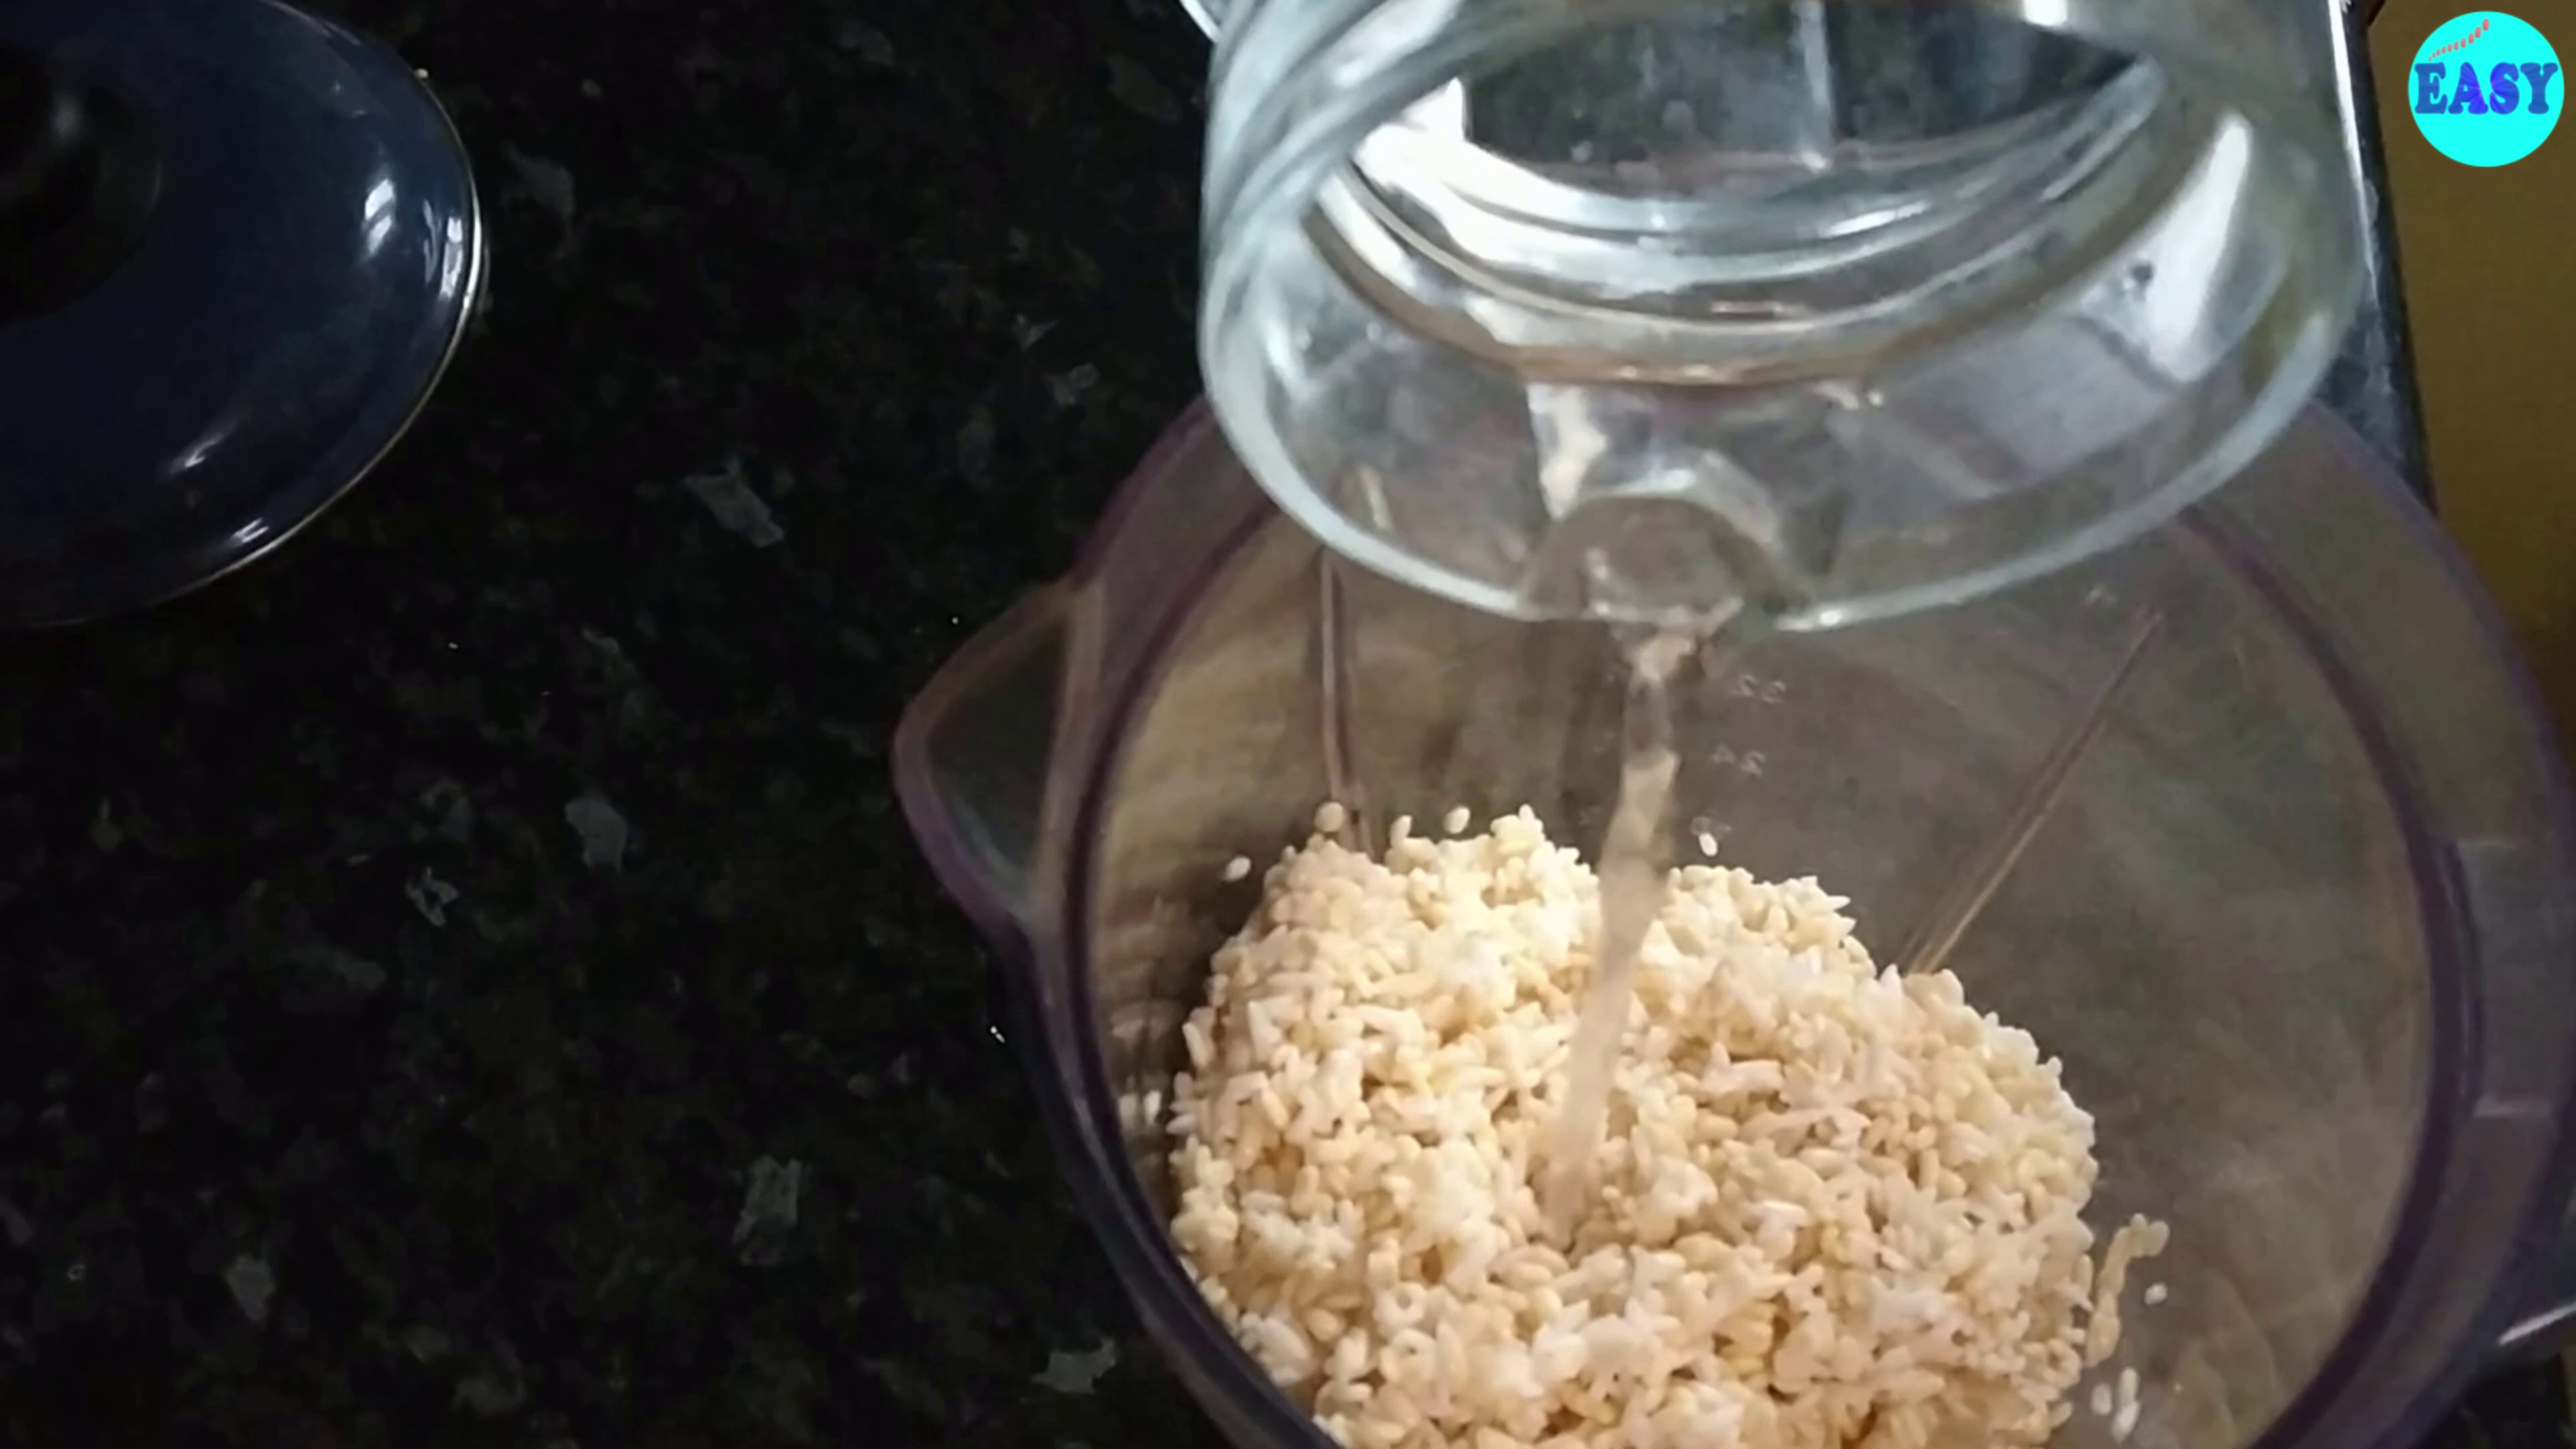 Step 2 - Transfer the soaked urad dal and rice to a mixer jar and blend it with a little bit of water to make a coarse paste. Make sure you use the minimal quantity of water for grinding.